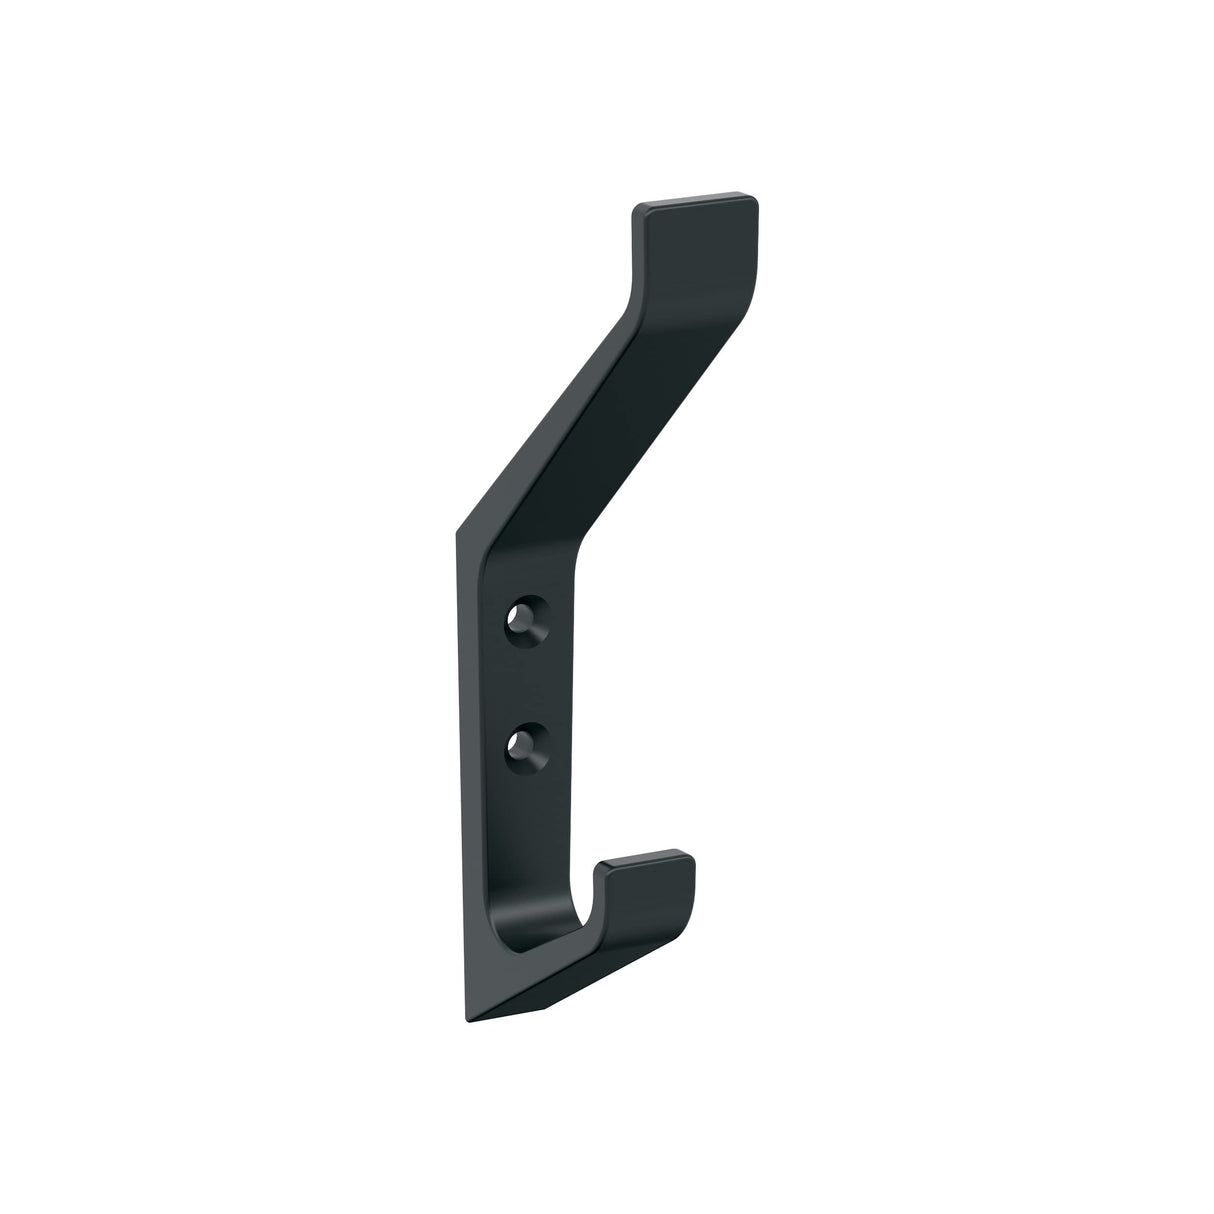 Amerock H37003MB Emerge Double Prong Decorative Wall Hook Matte Black Hook for Coats, Hats, Backpacks, Bags Hooks for Bathroom, Bedroom, Closet, Entryway, Laundry Room, Office